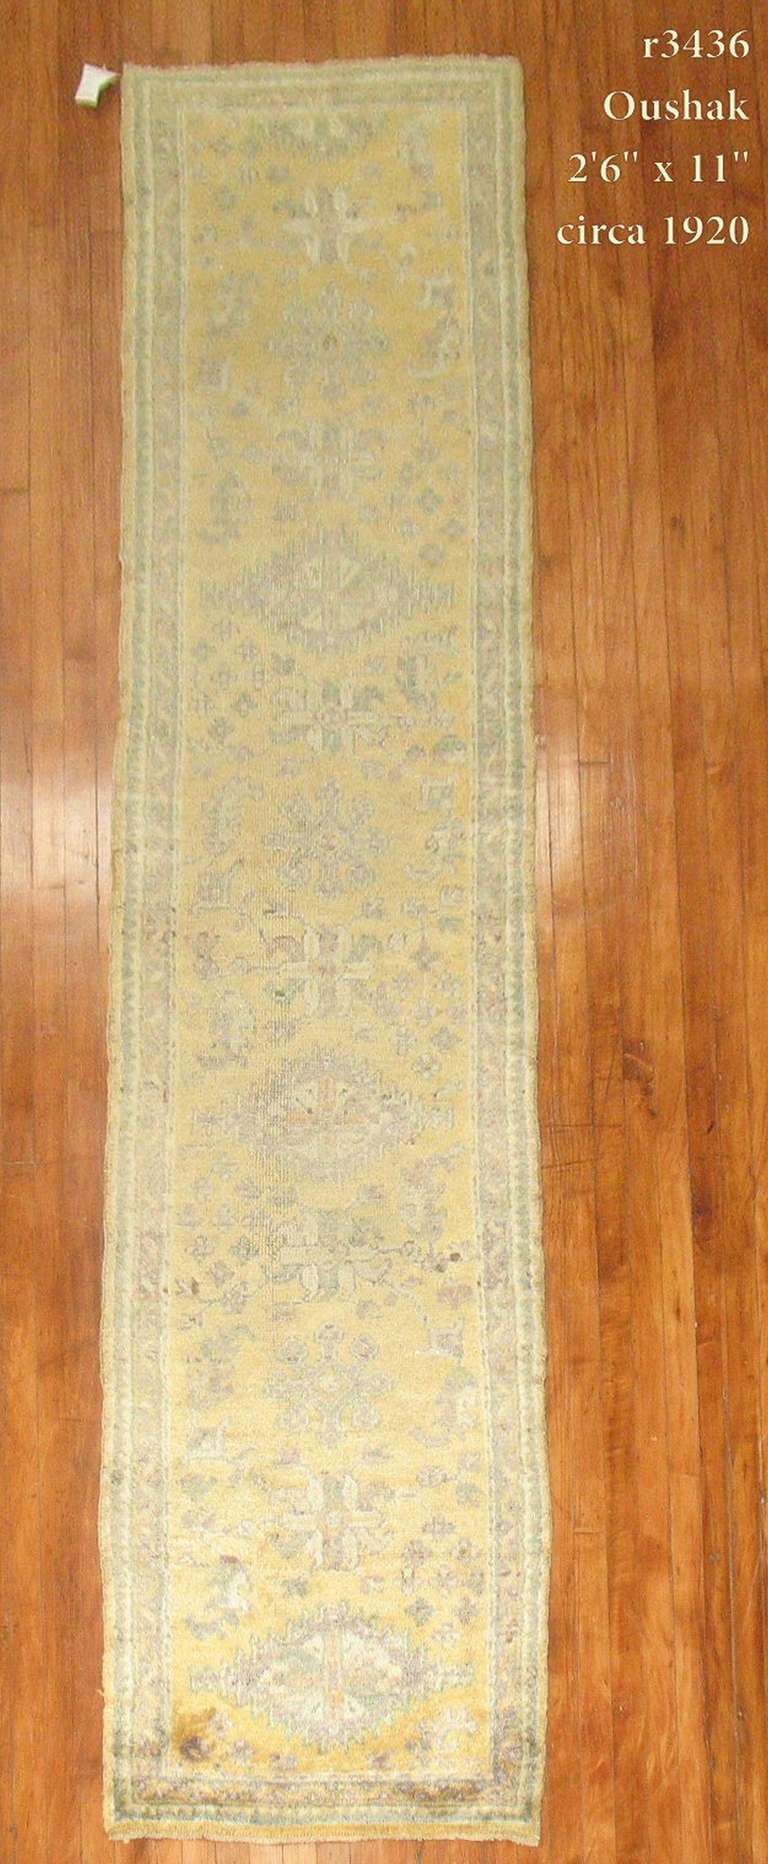 An antique Oushak runner in saffron and chartreuse with shades of lavender.

2'6'' x 11'